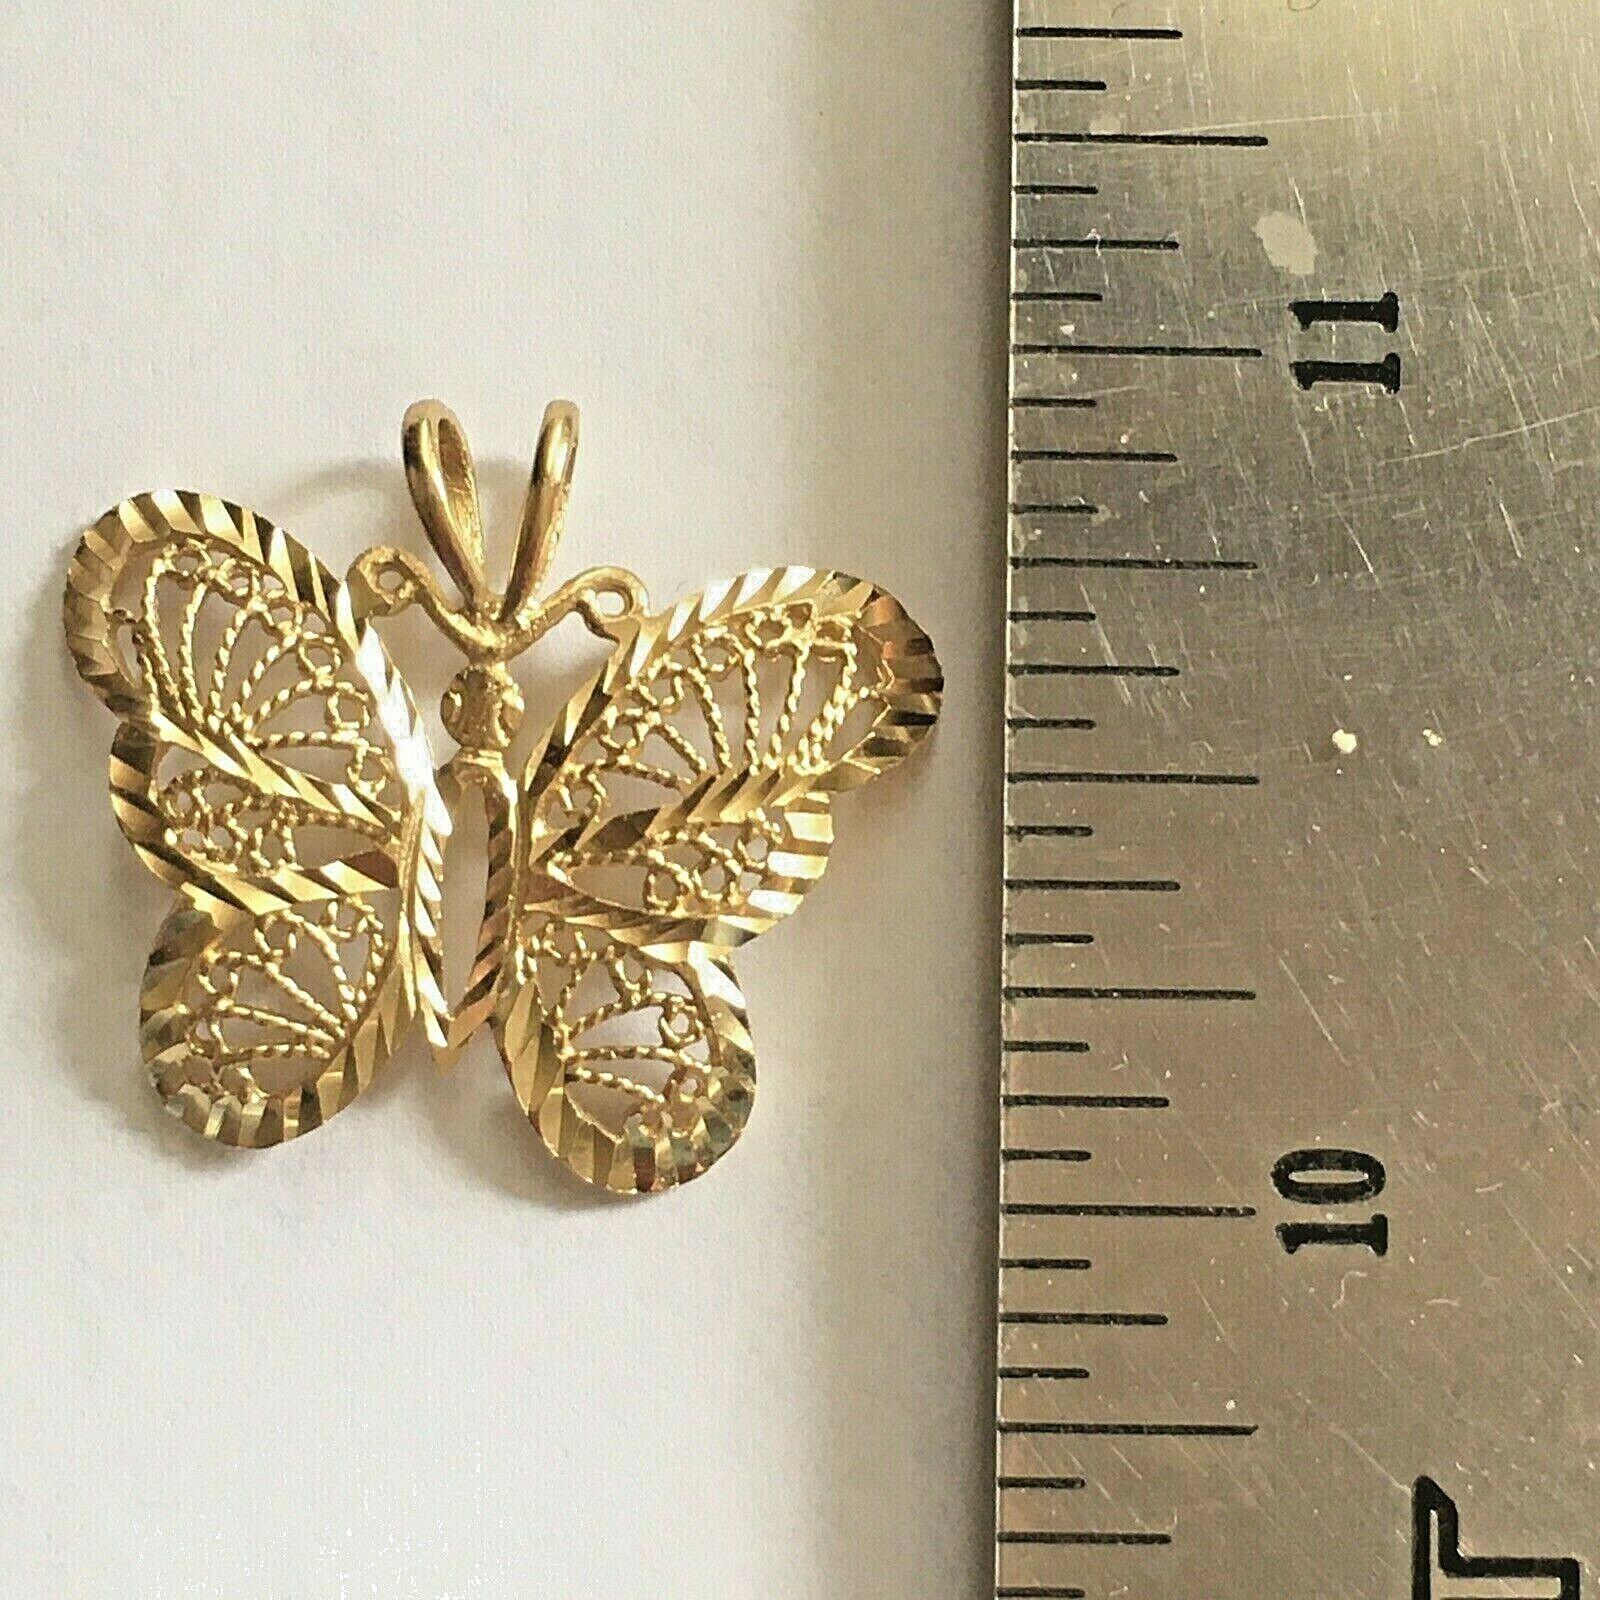 14k Yellow Gold Butterfly Filigree Charm Weight: 2.4 Gram Measurement: Hanging 1 inch Condition: Excellent preowned condition, no repairs, no damage, see pictures